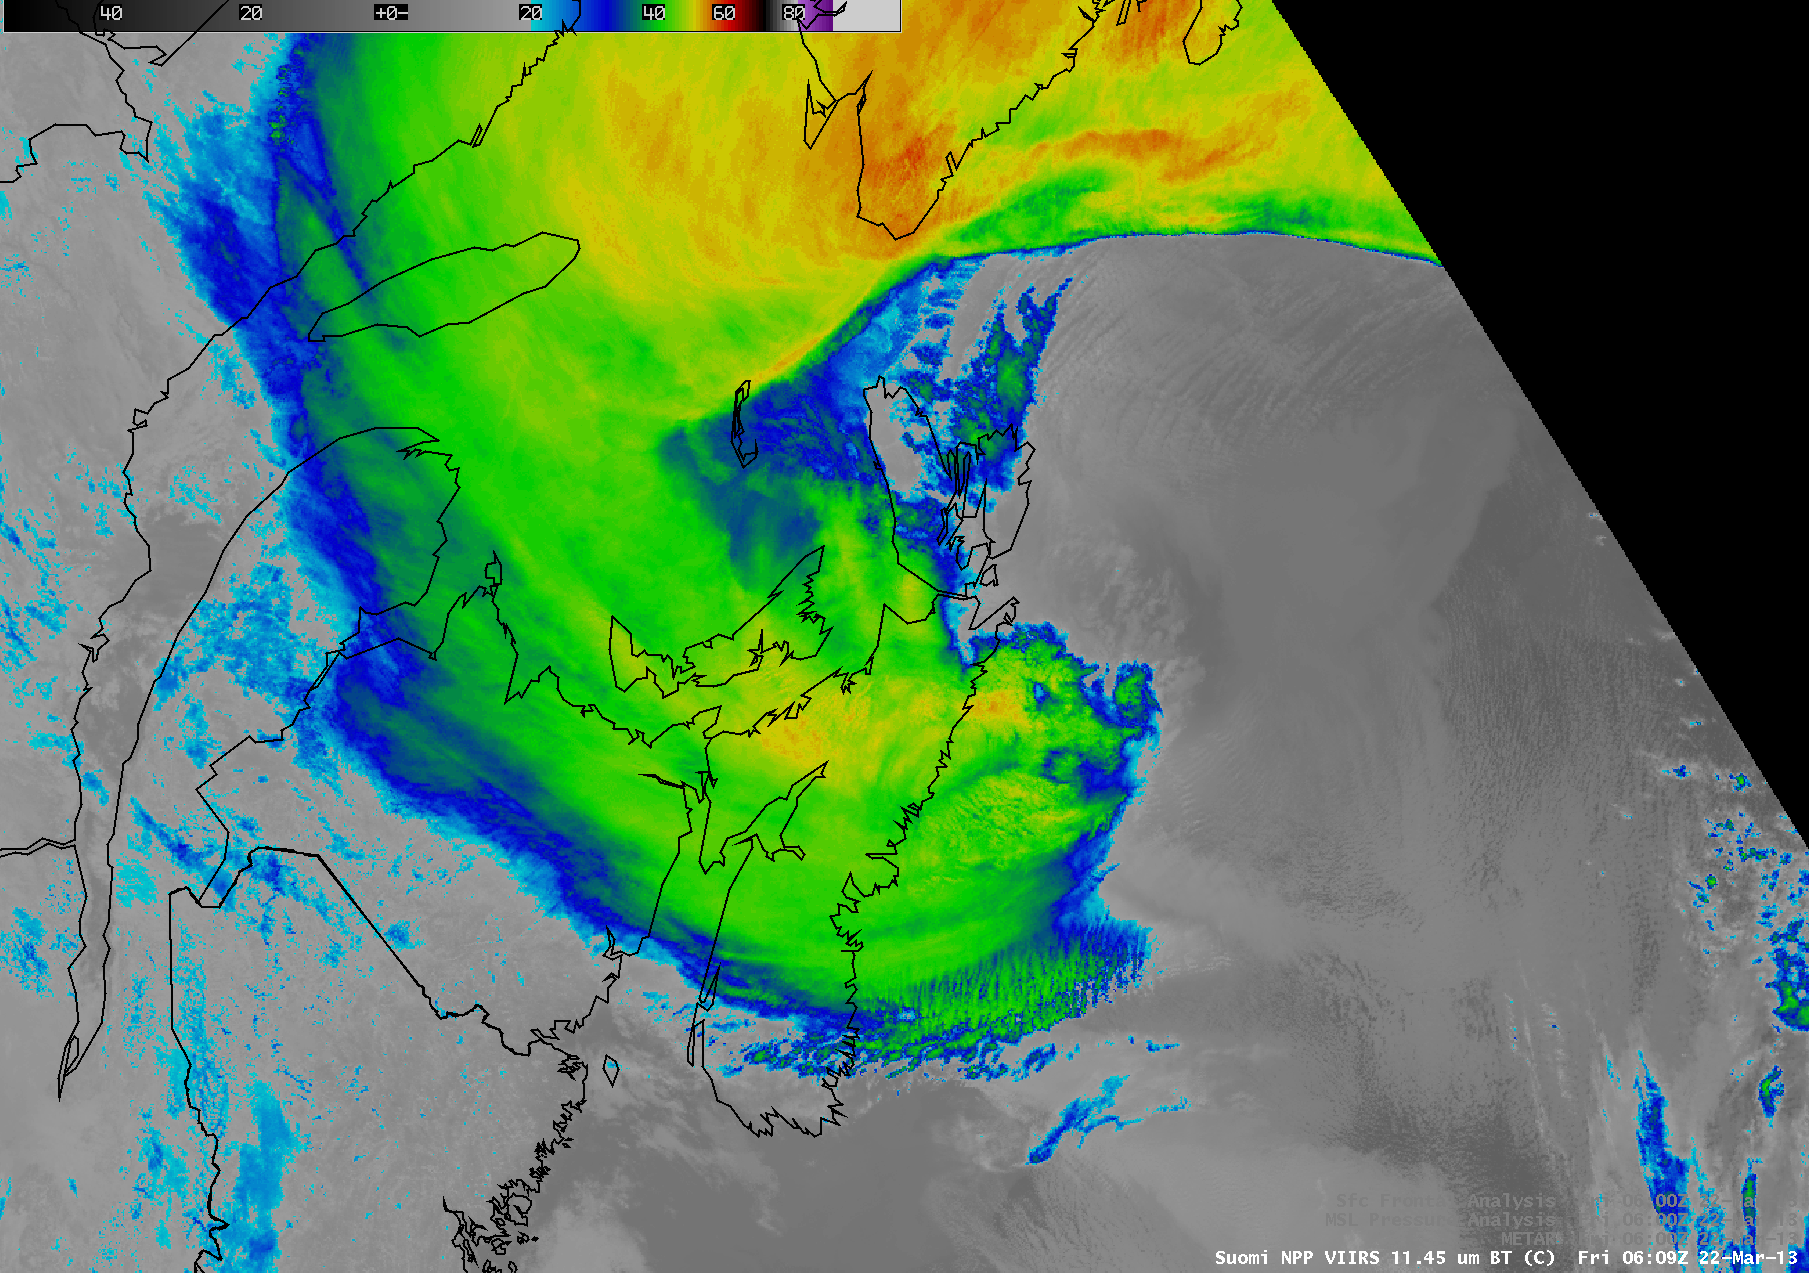 Suomi NPP VIIRS 11.45 Âµm IR channel and 0.7 Âµm Day/Night Band images (with overlays of surface reports and surface analysis)